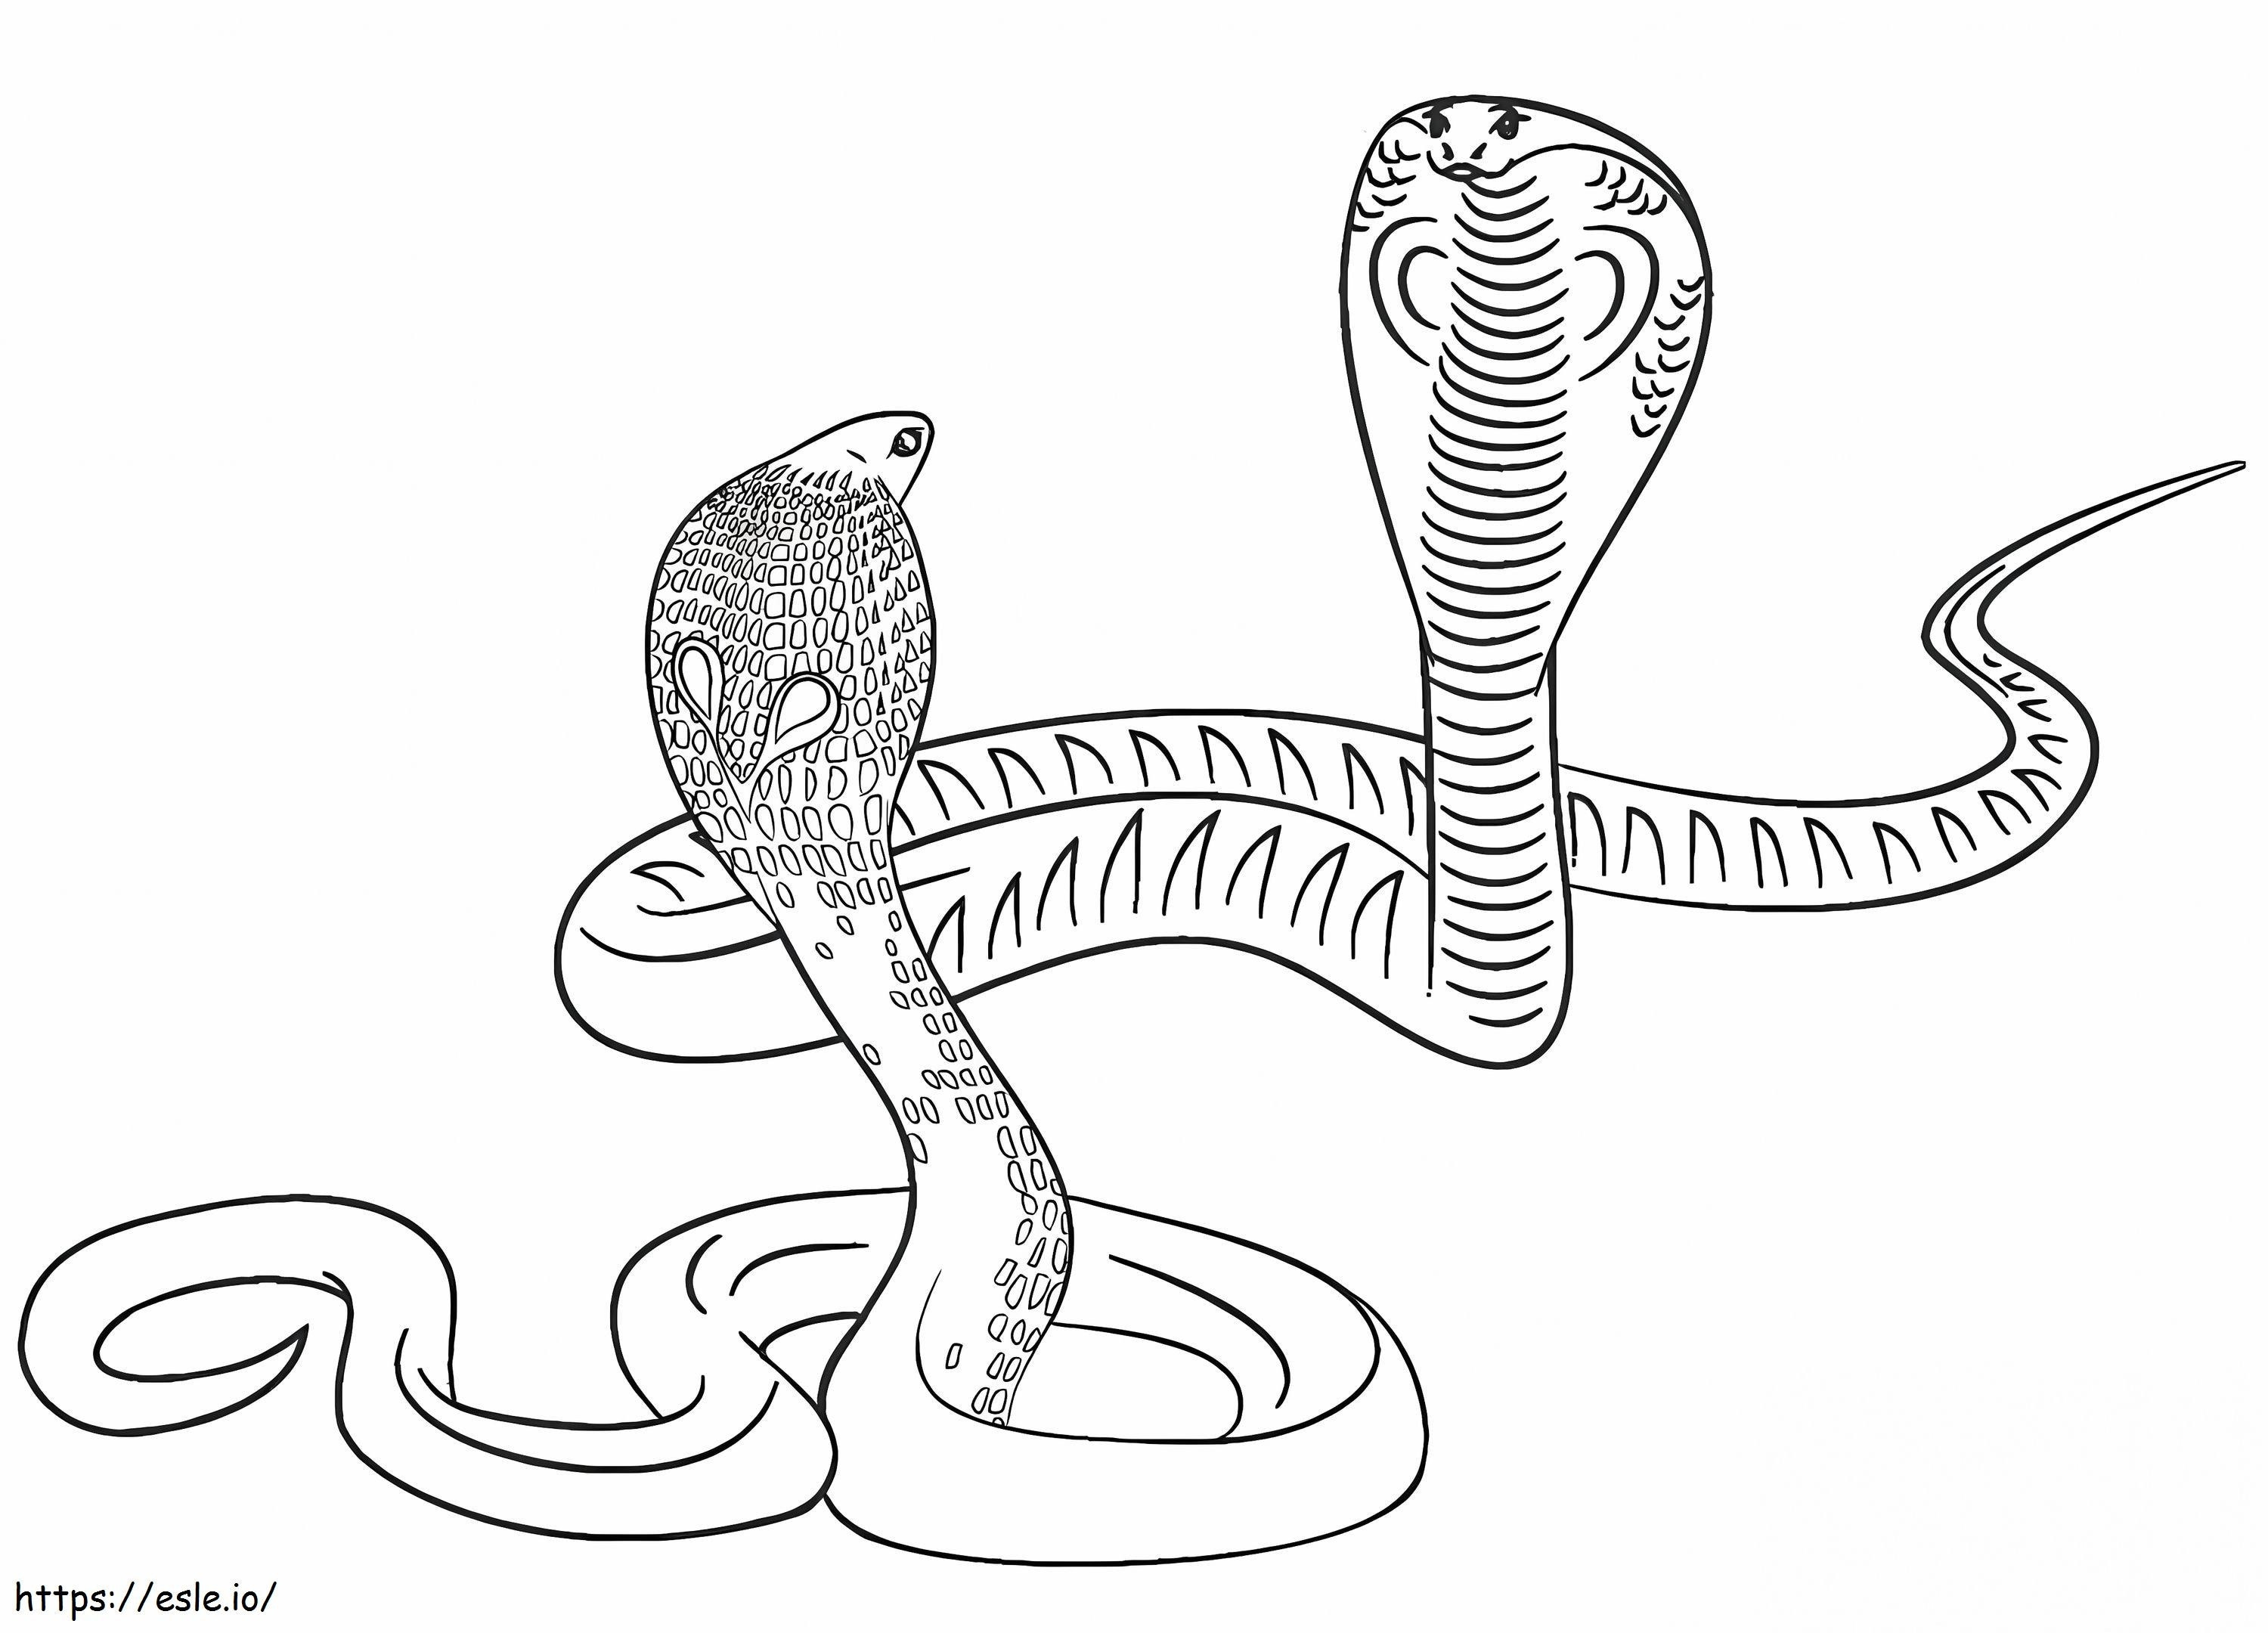 Two Curve coloring page